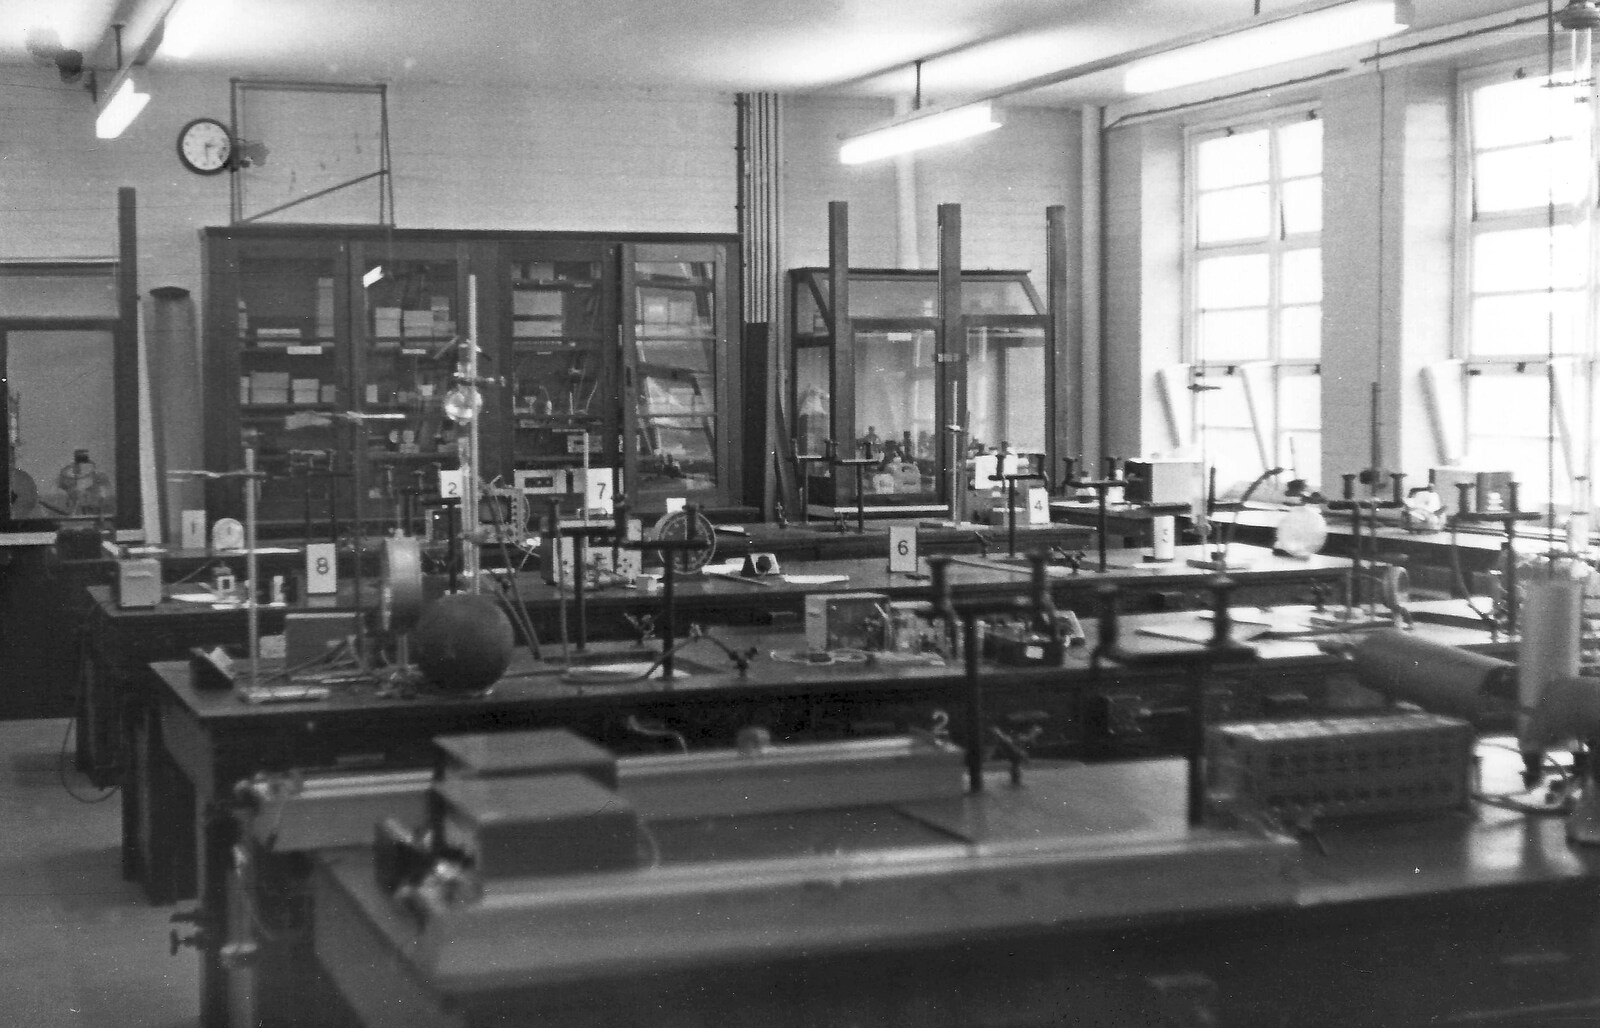 The physics classroom from Learning Black-and-White Photography, Brockenhurst College, Hampshire - 10th March 1985